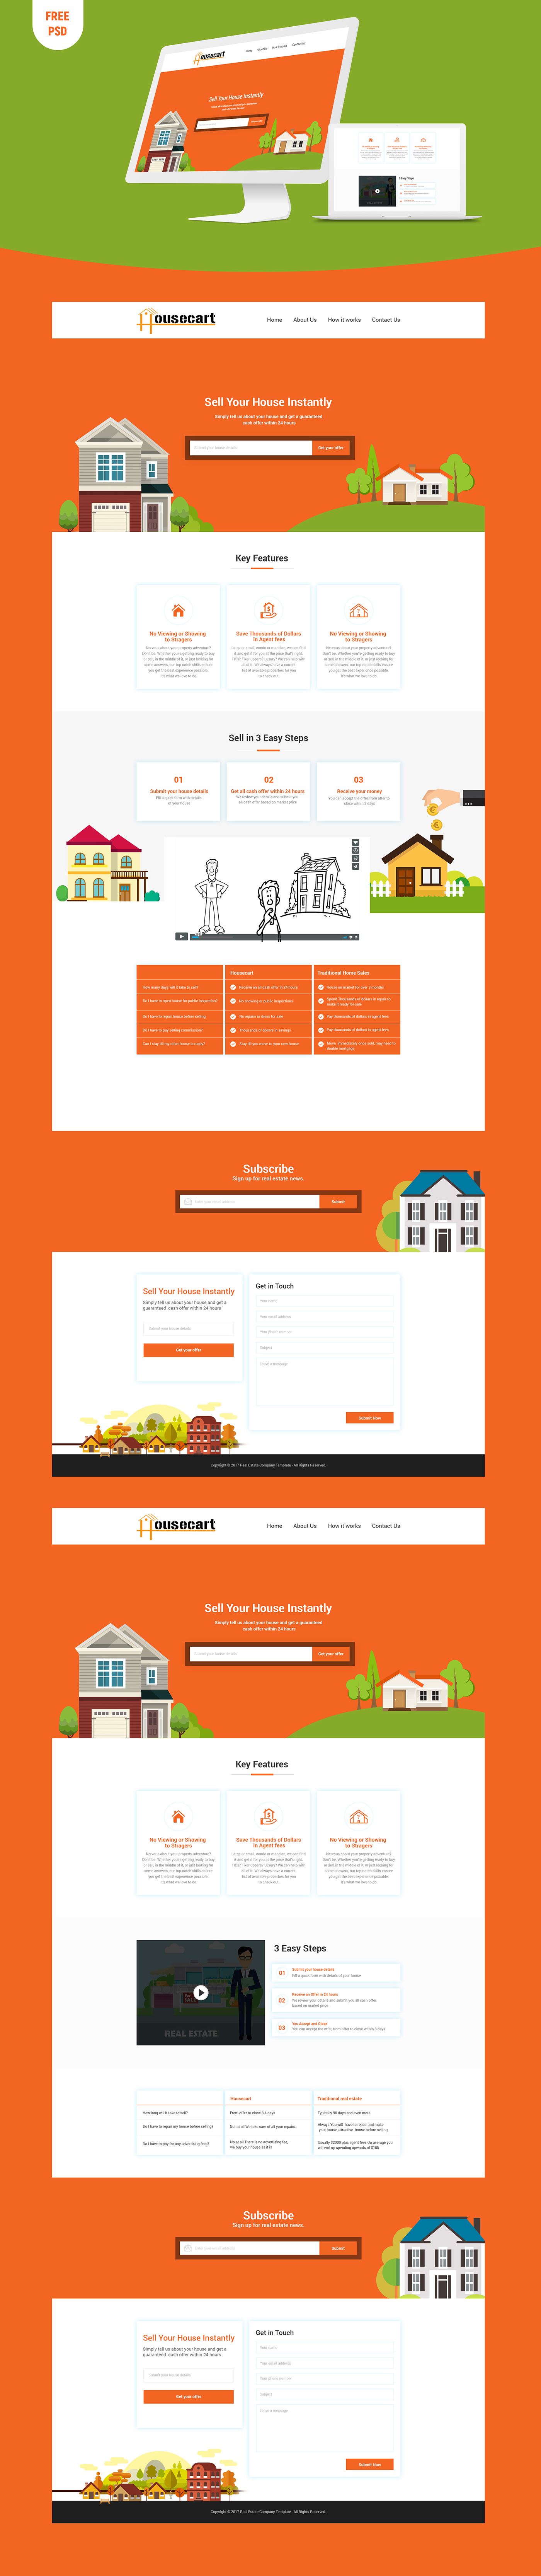 real-estate-psd-template-free-download-on-behance